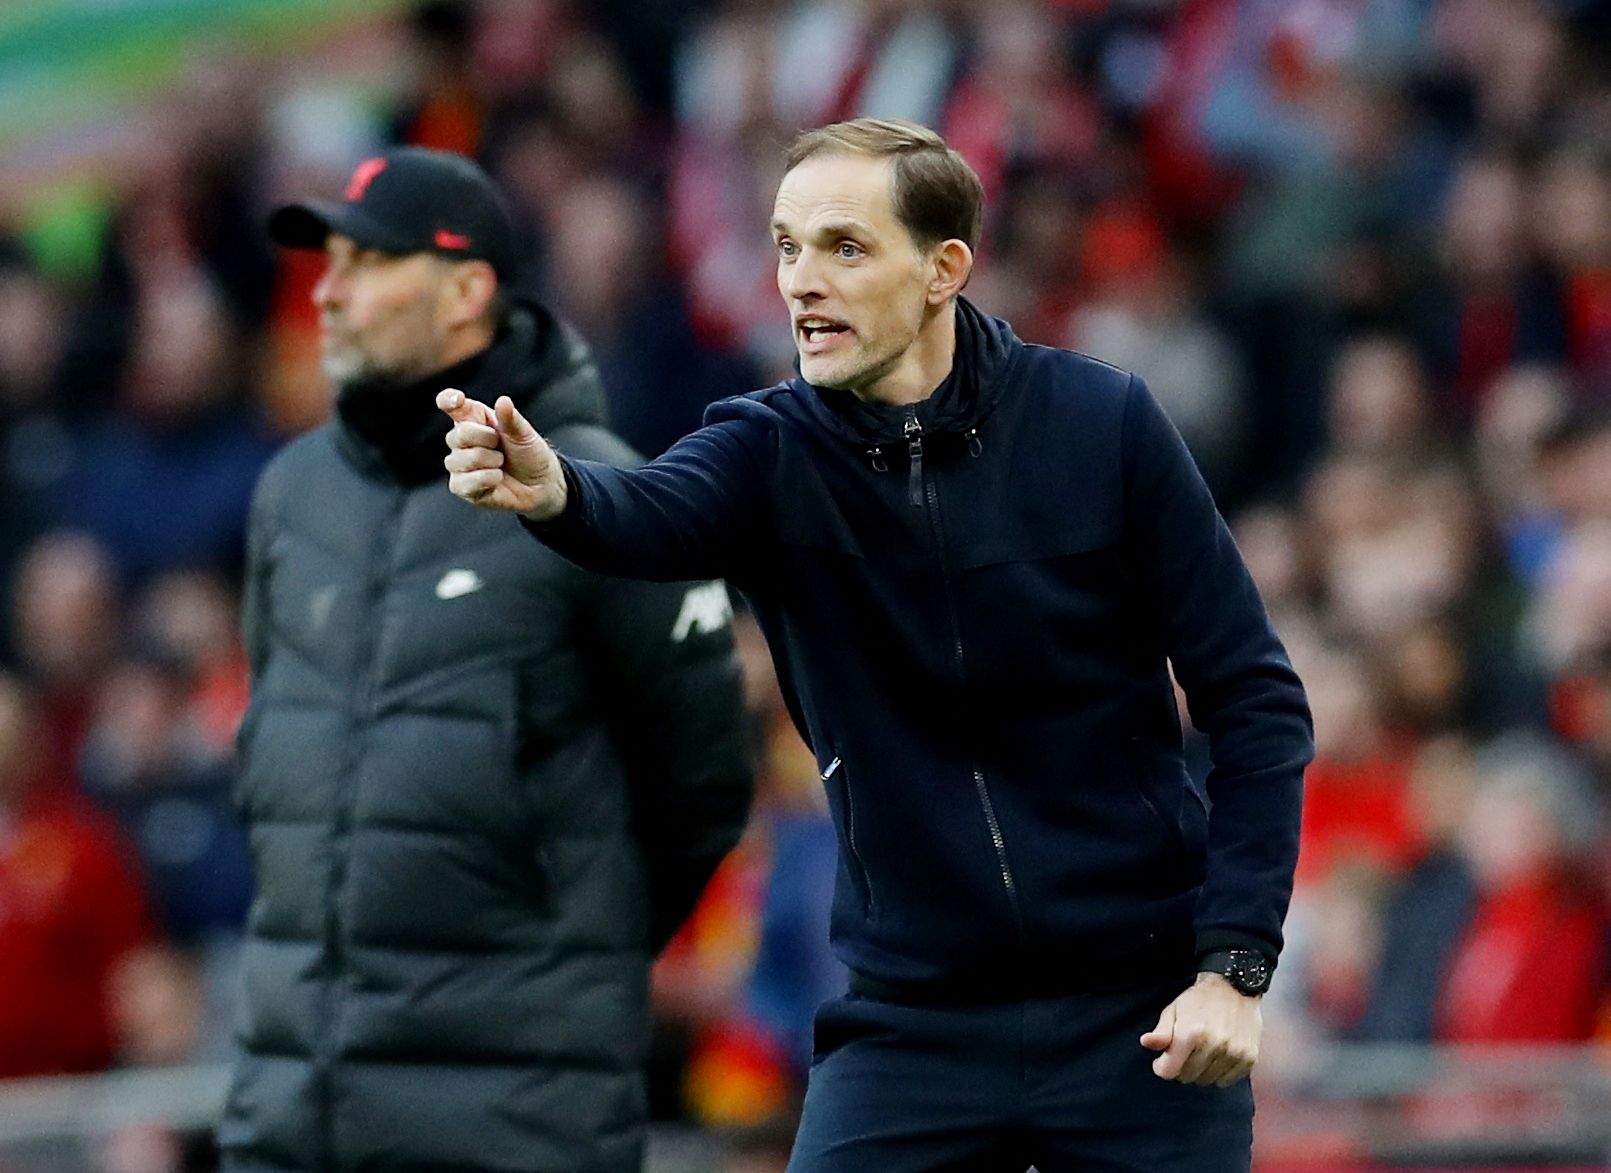 Soccer Football - Carabao Cup Final - Chelsea v Liverpool - Wembley Stadium, London, Britain - February 27, 2022 Liverpool manager Juergen Klopp and Chelsea manager Thomas Tuchel REUTERS/David Klein